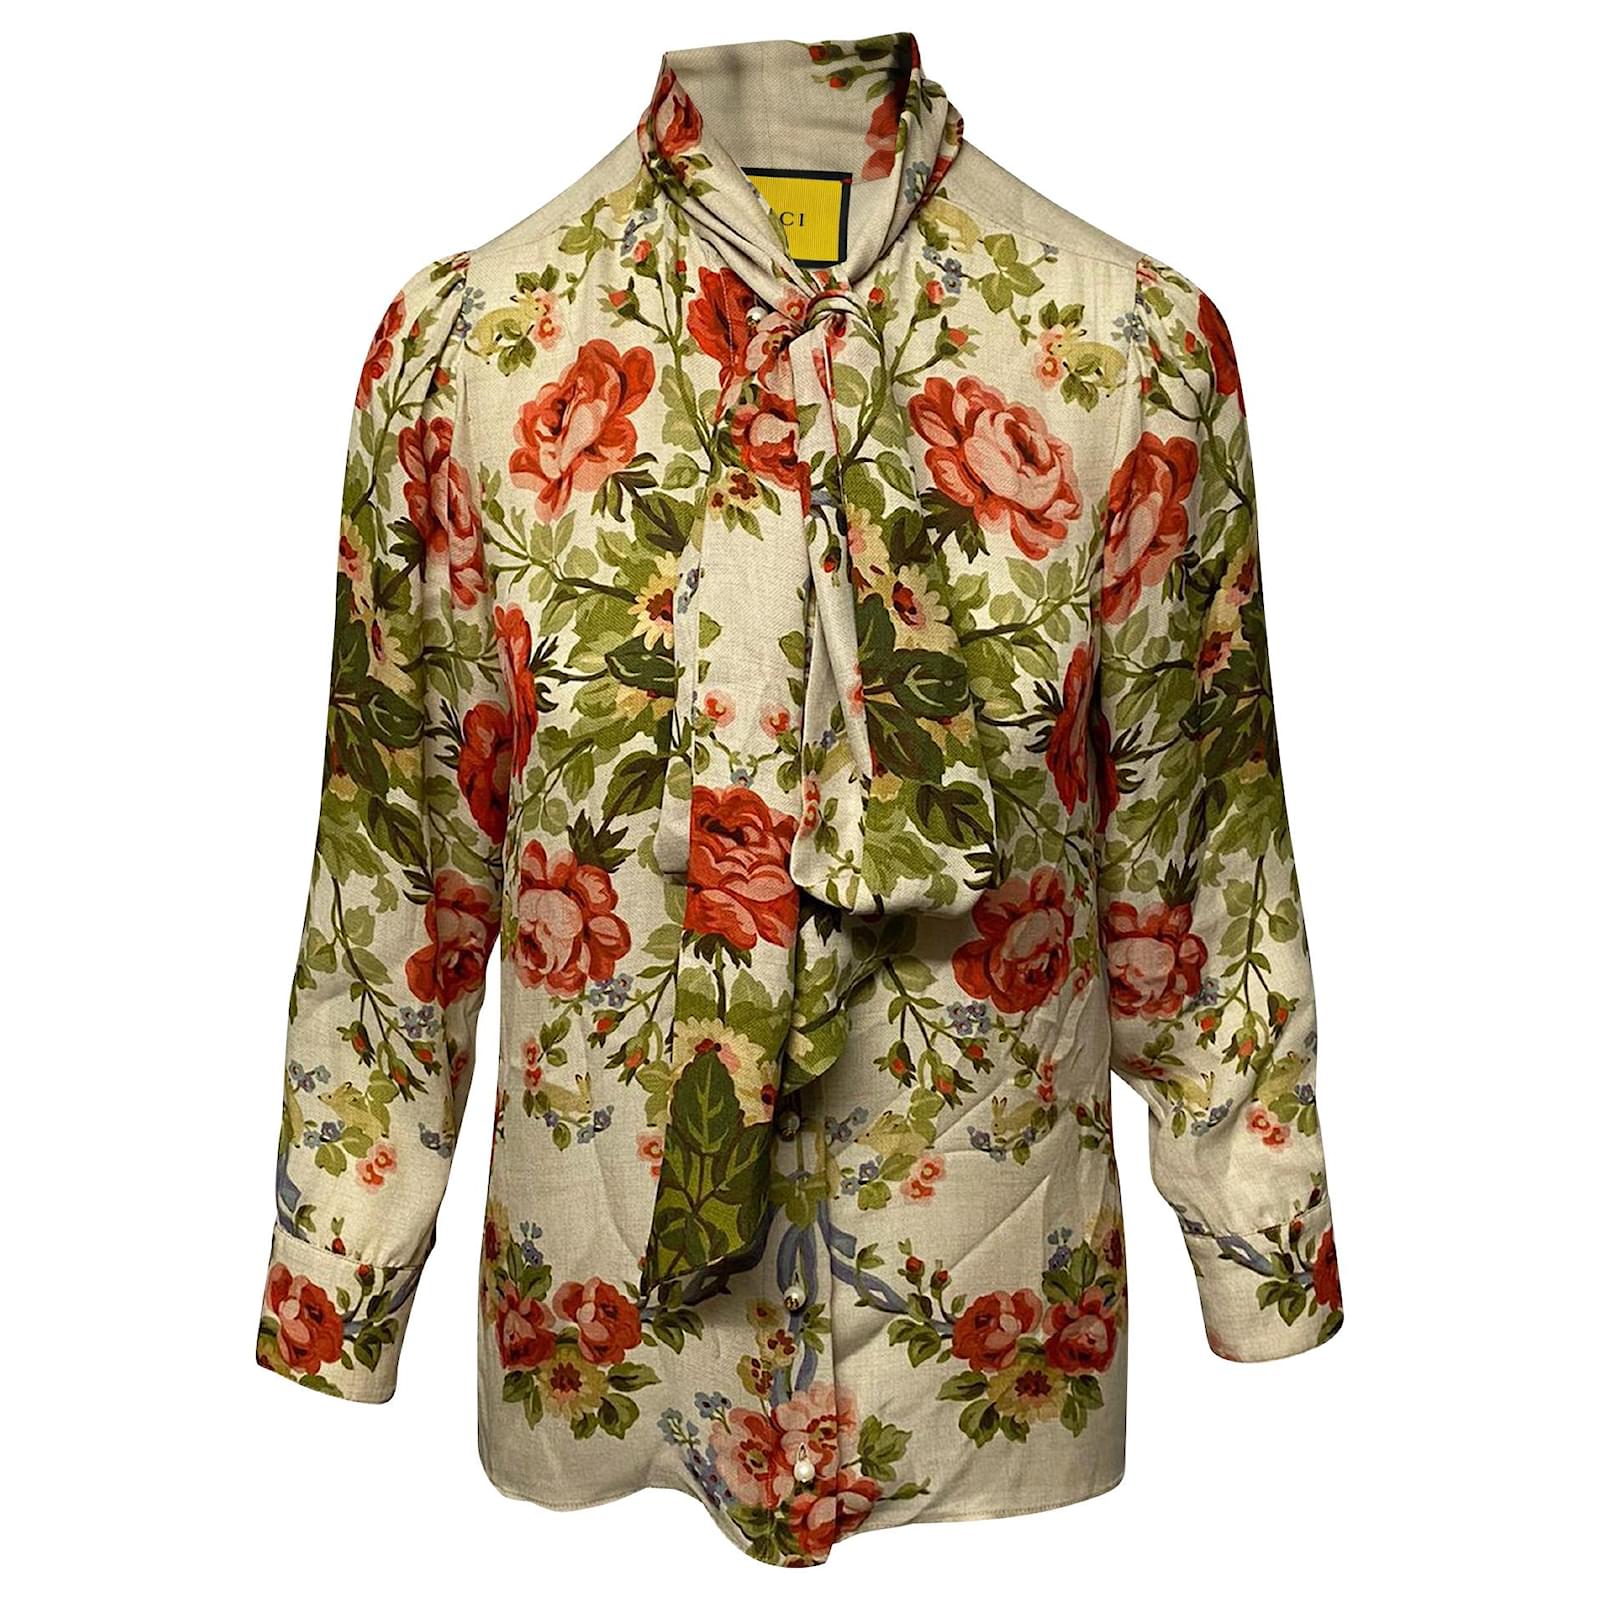 Gucci Floral Shirt with Bow in Multicolor Silk Multiple colors ref ...